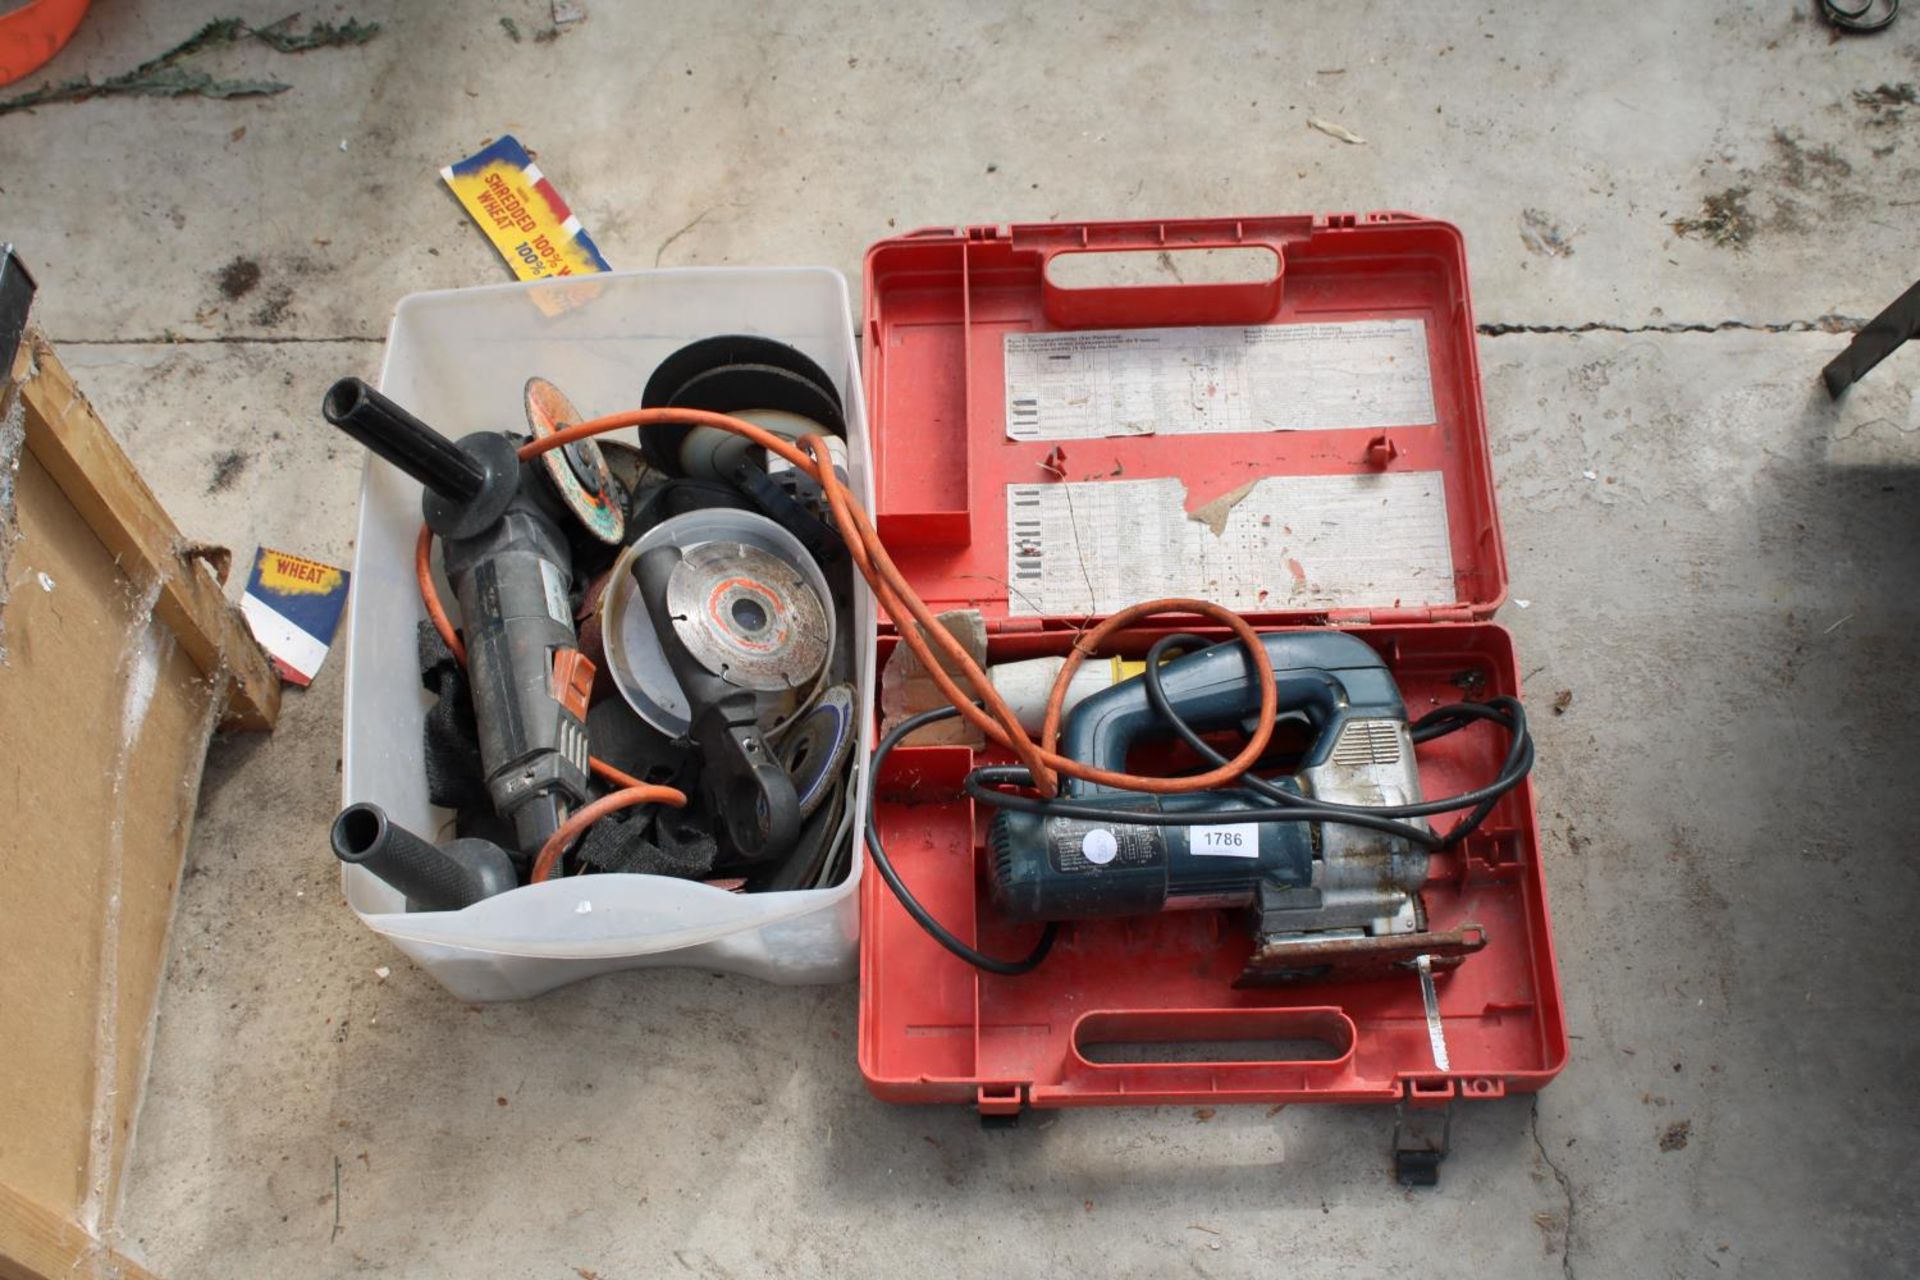 A BOSCH ELECTRIC JIGSAW AND A BLACK AND DECKER GRINDER WITH AN ASSORTMENT OF DISCS ETC